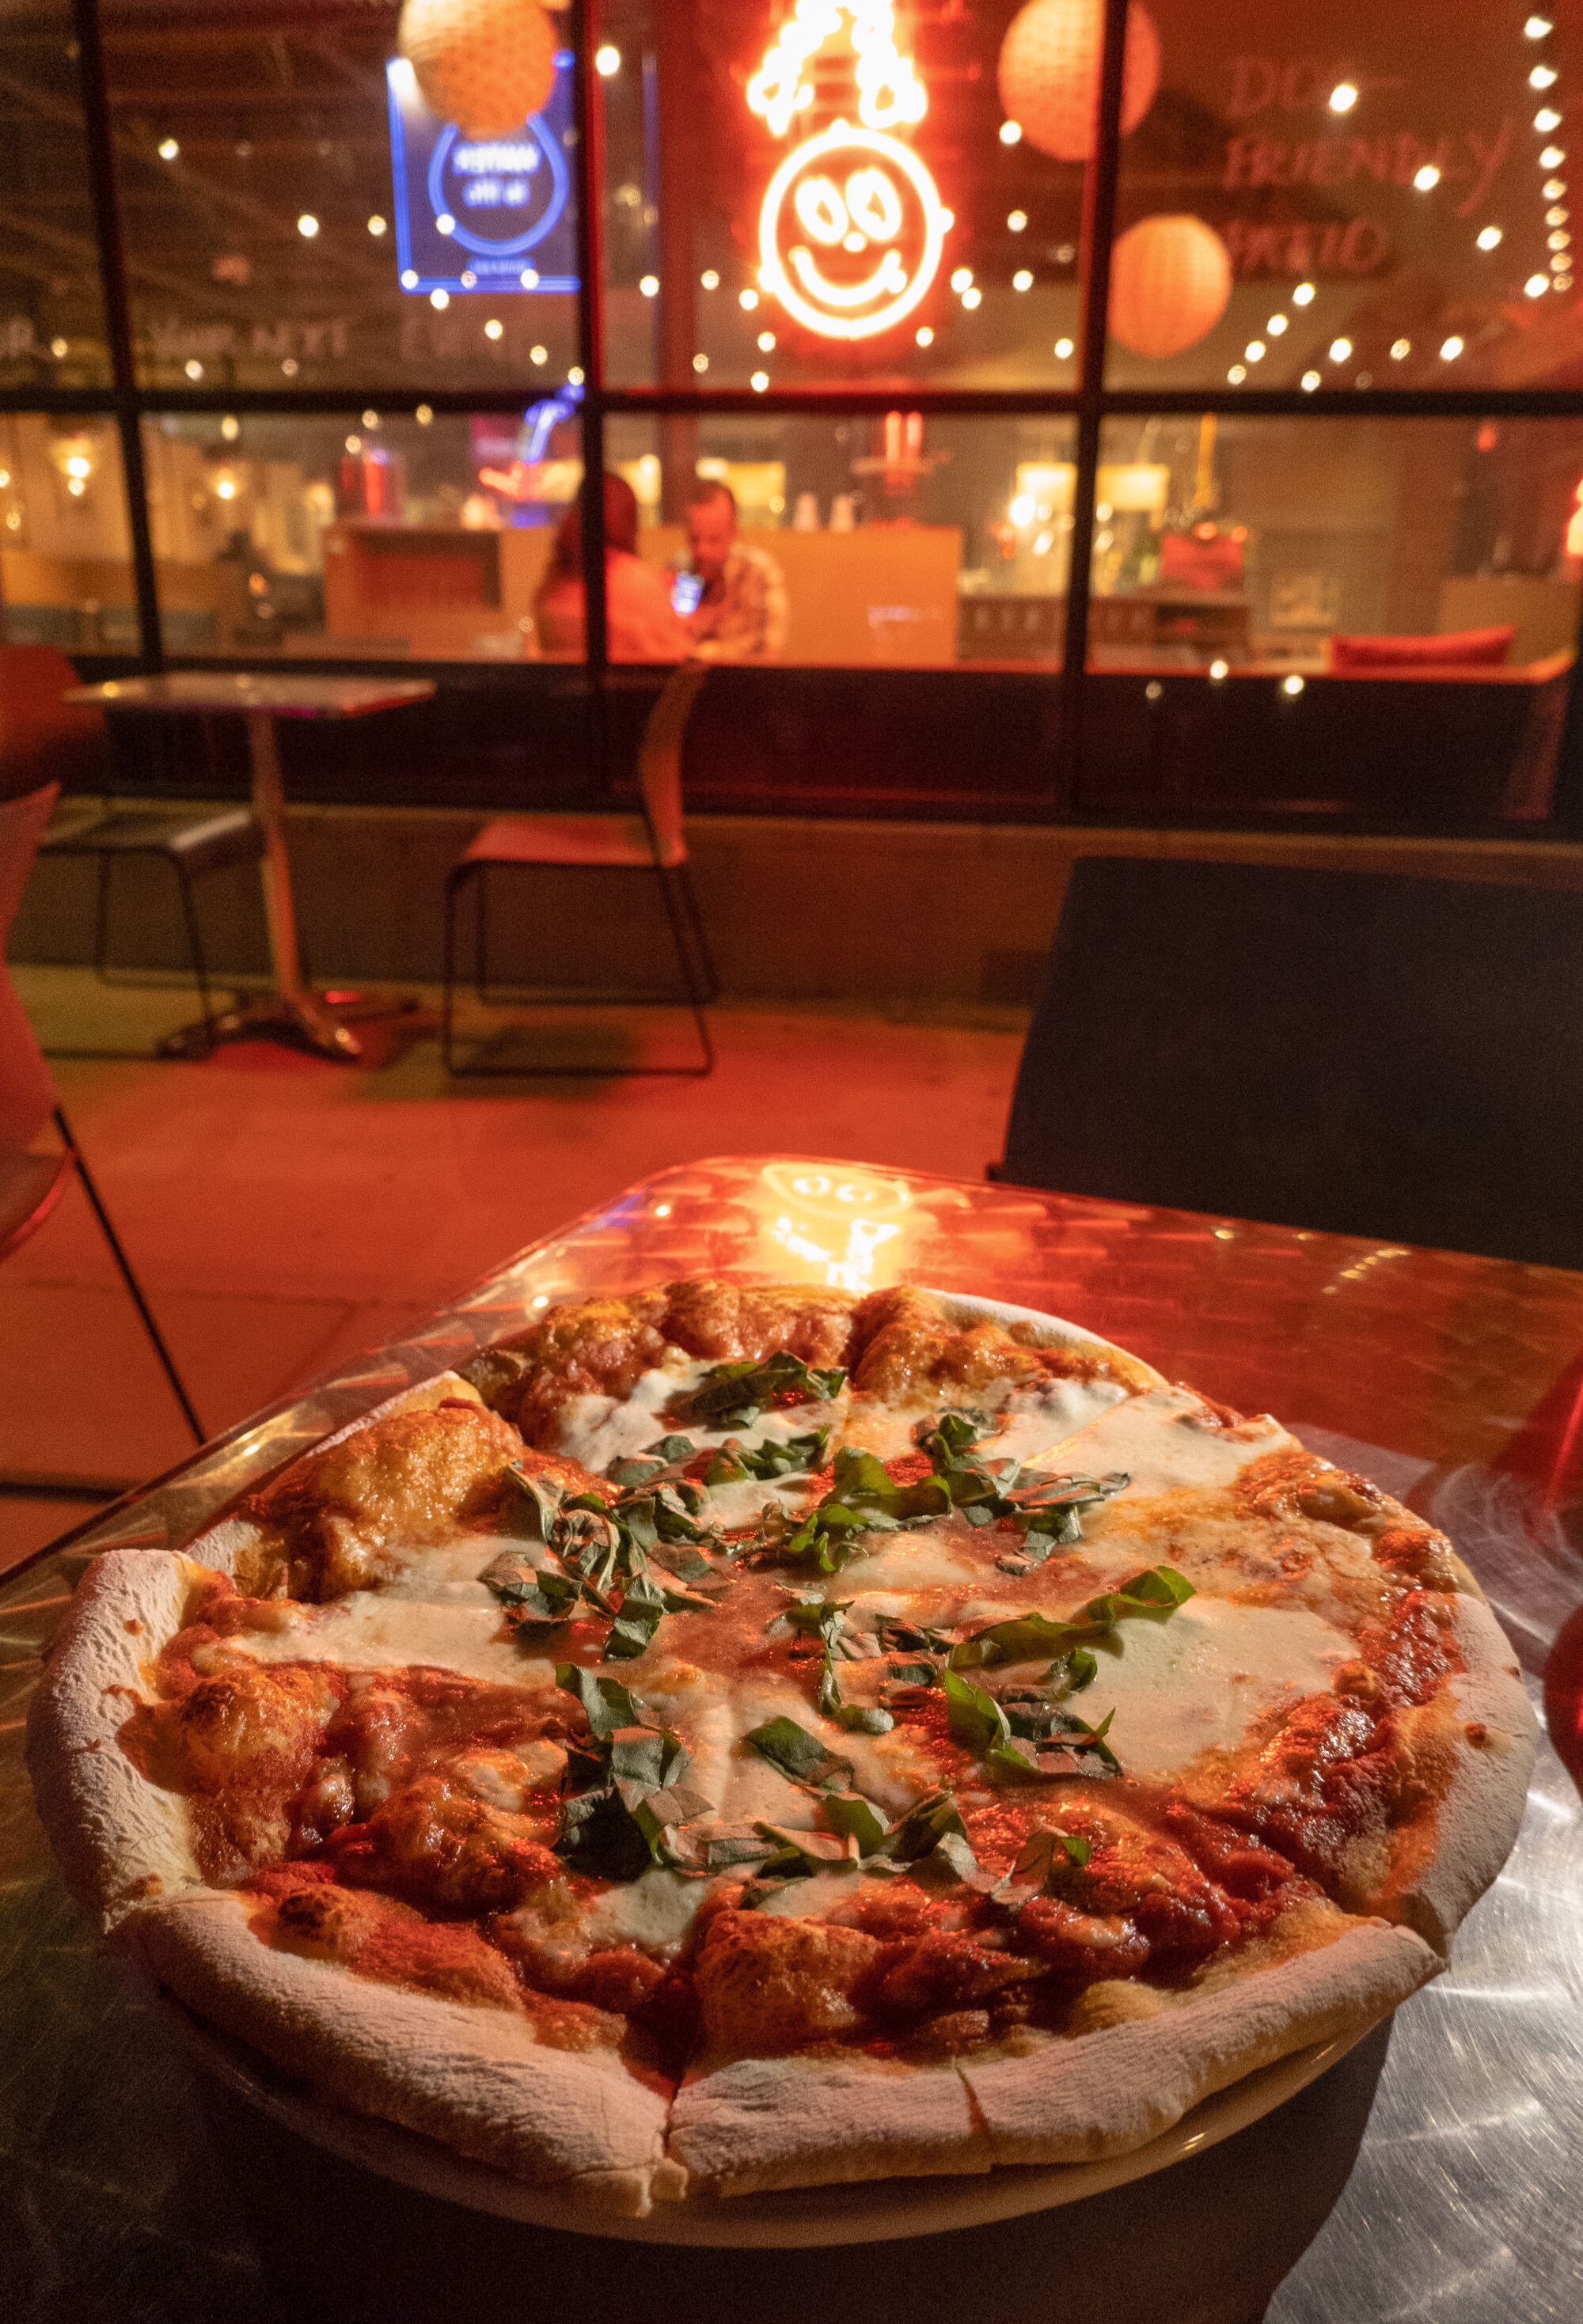 A wood-fired pizza on a table, with red neon lights in the background.